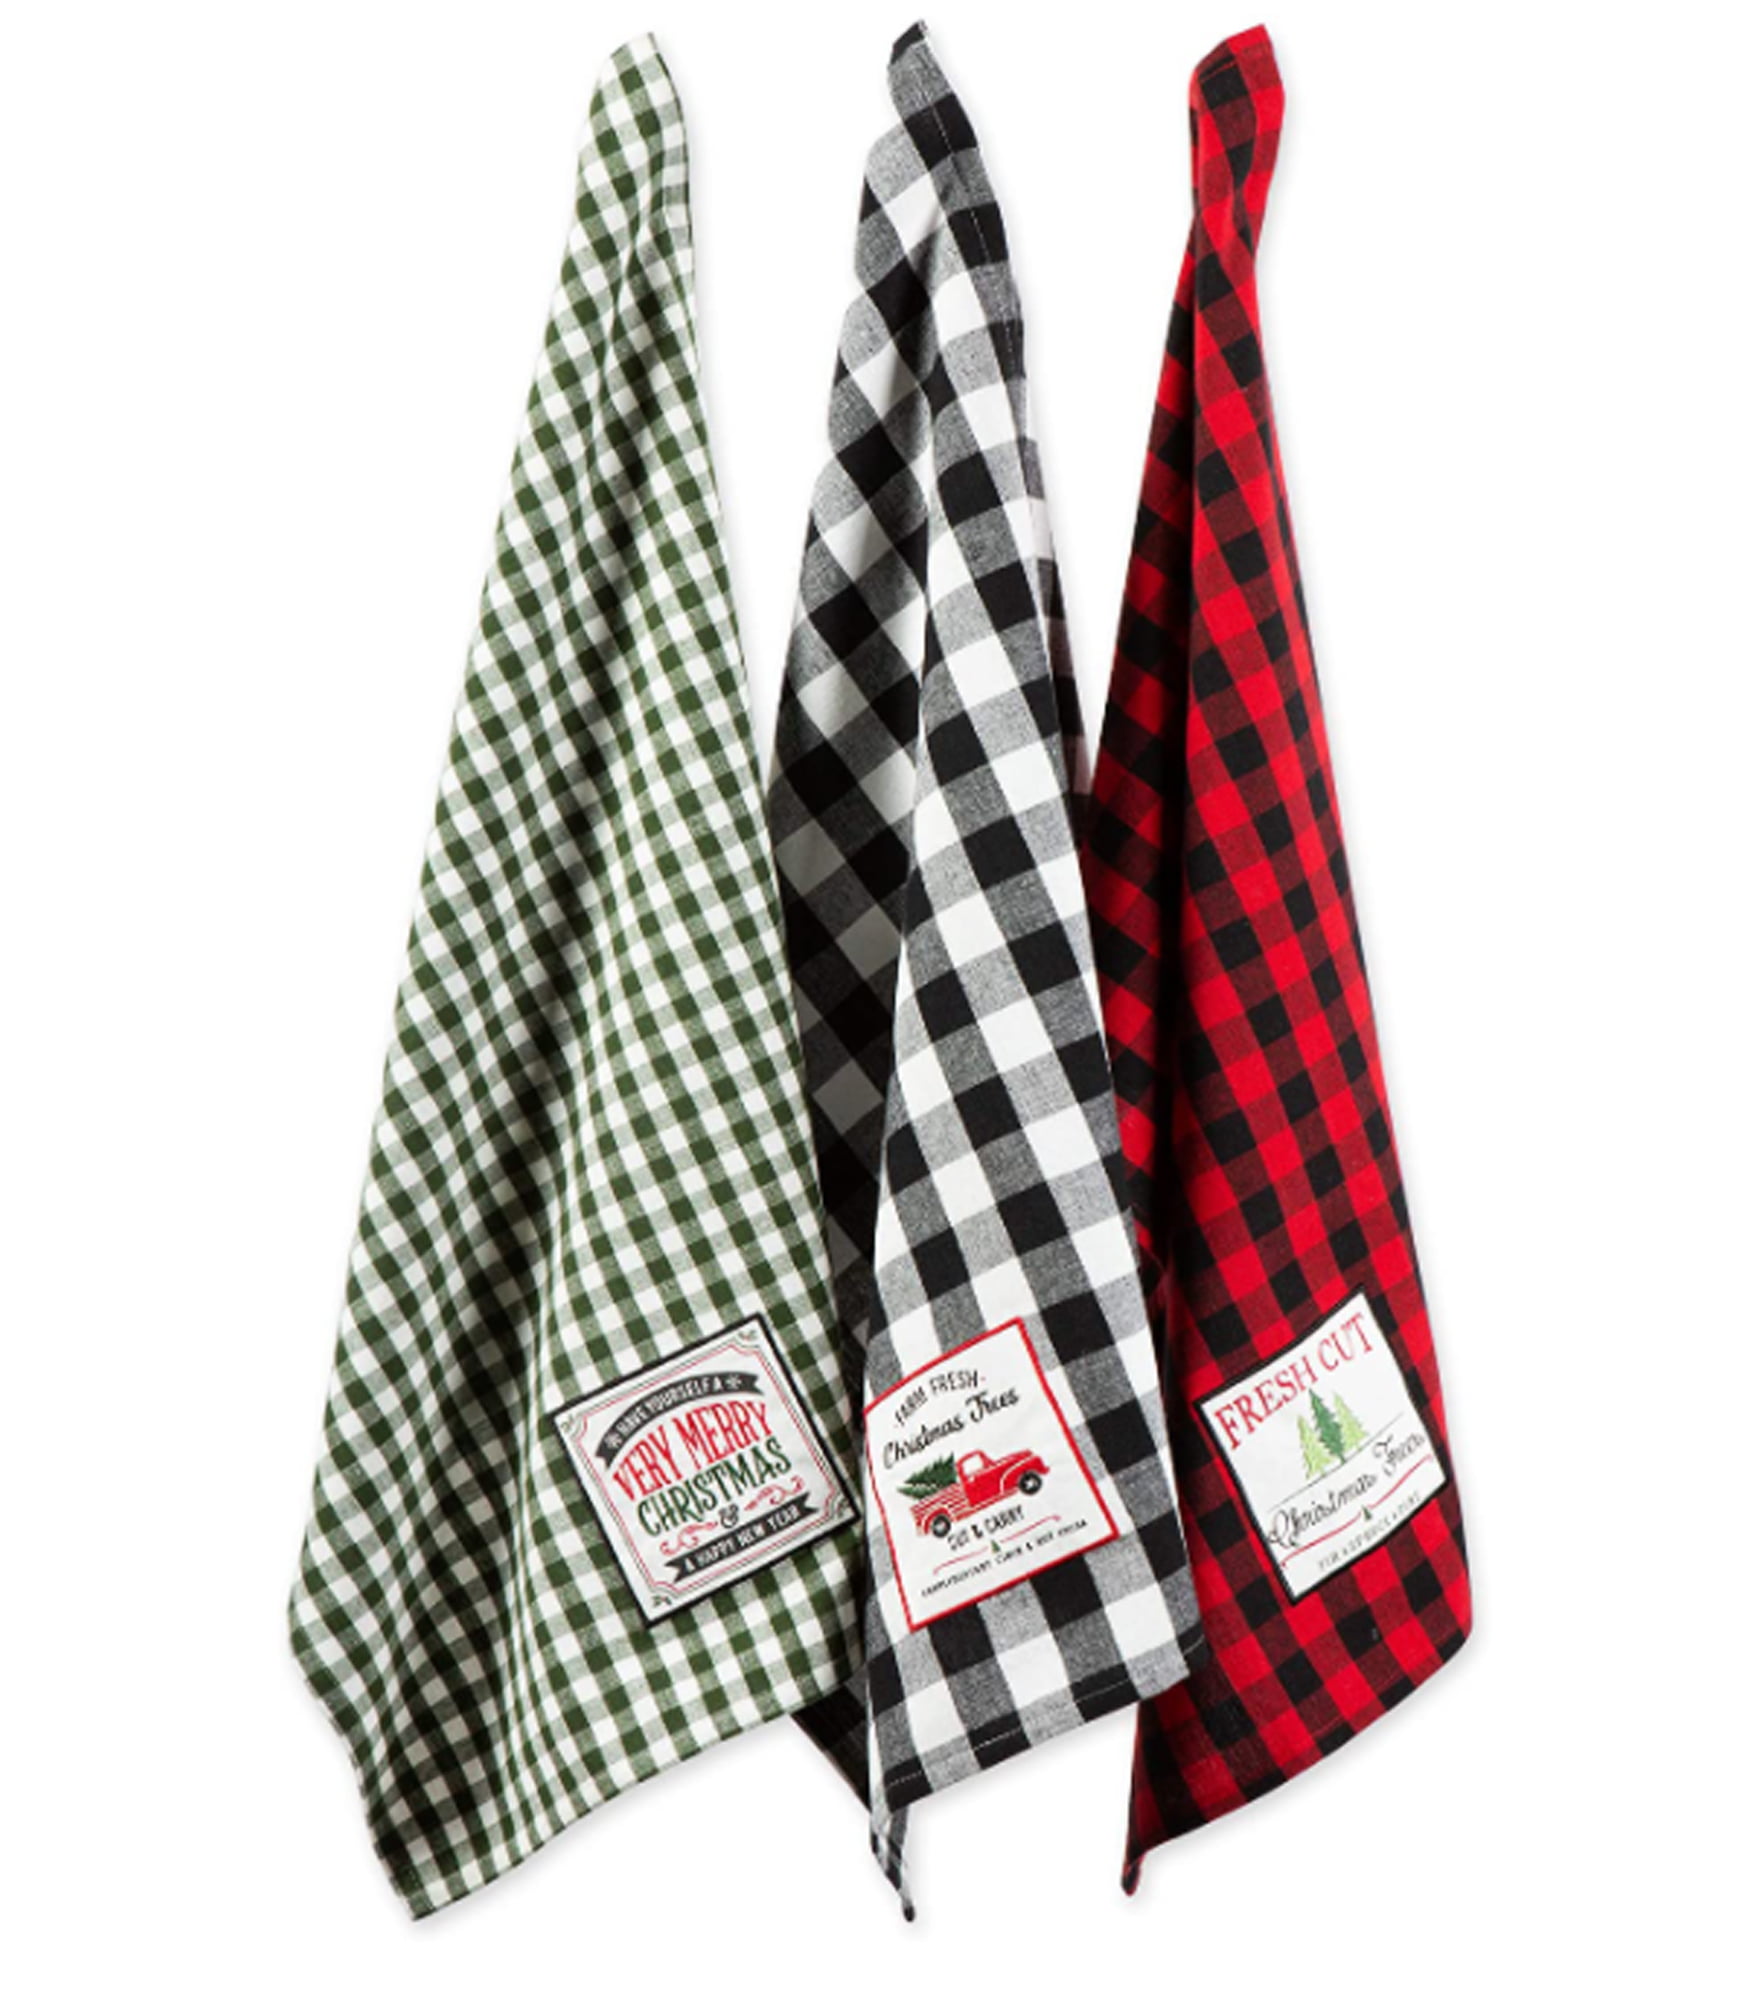 Cupcakes & Cashmere Gingham Plaid Checkered Hearts Kitchen Towels SET OF 3  NWT